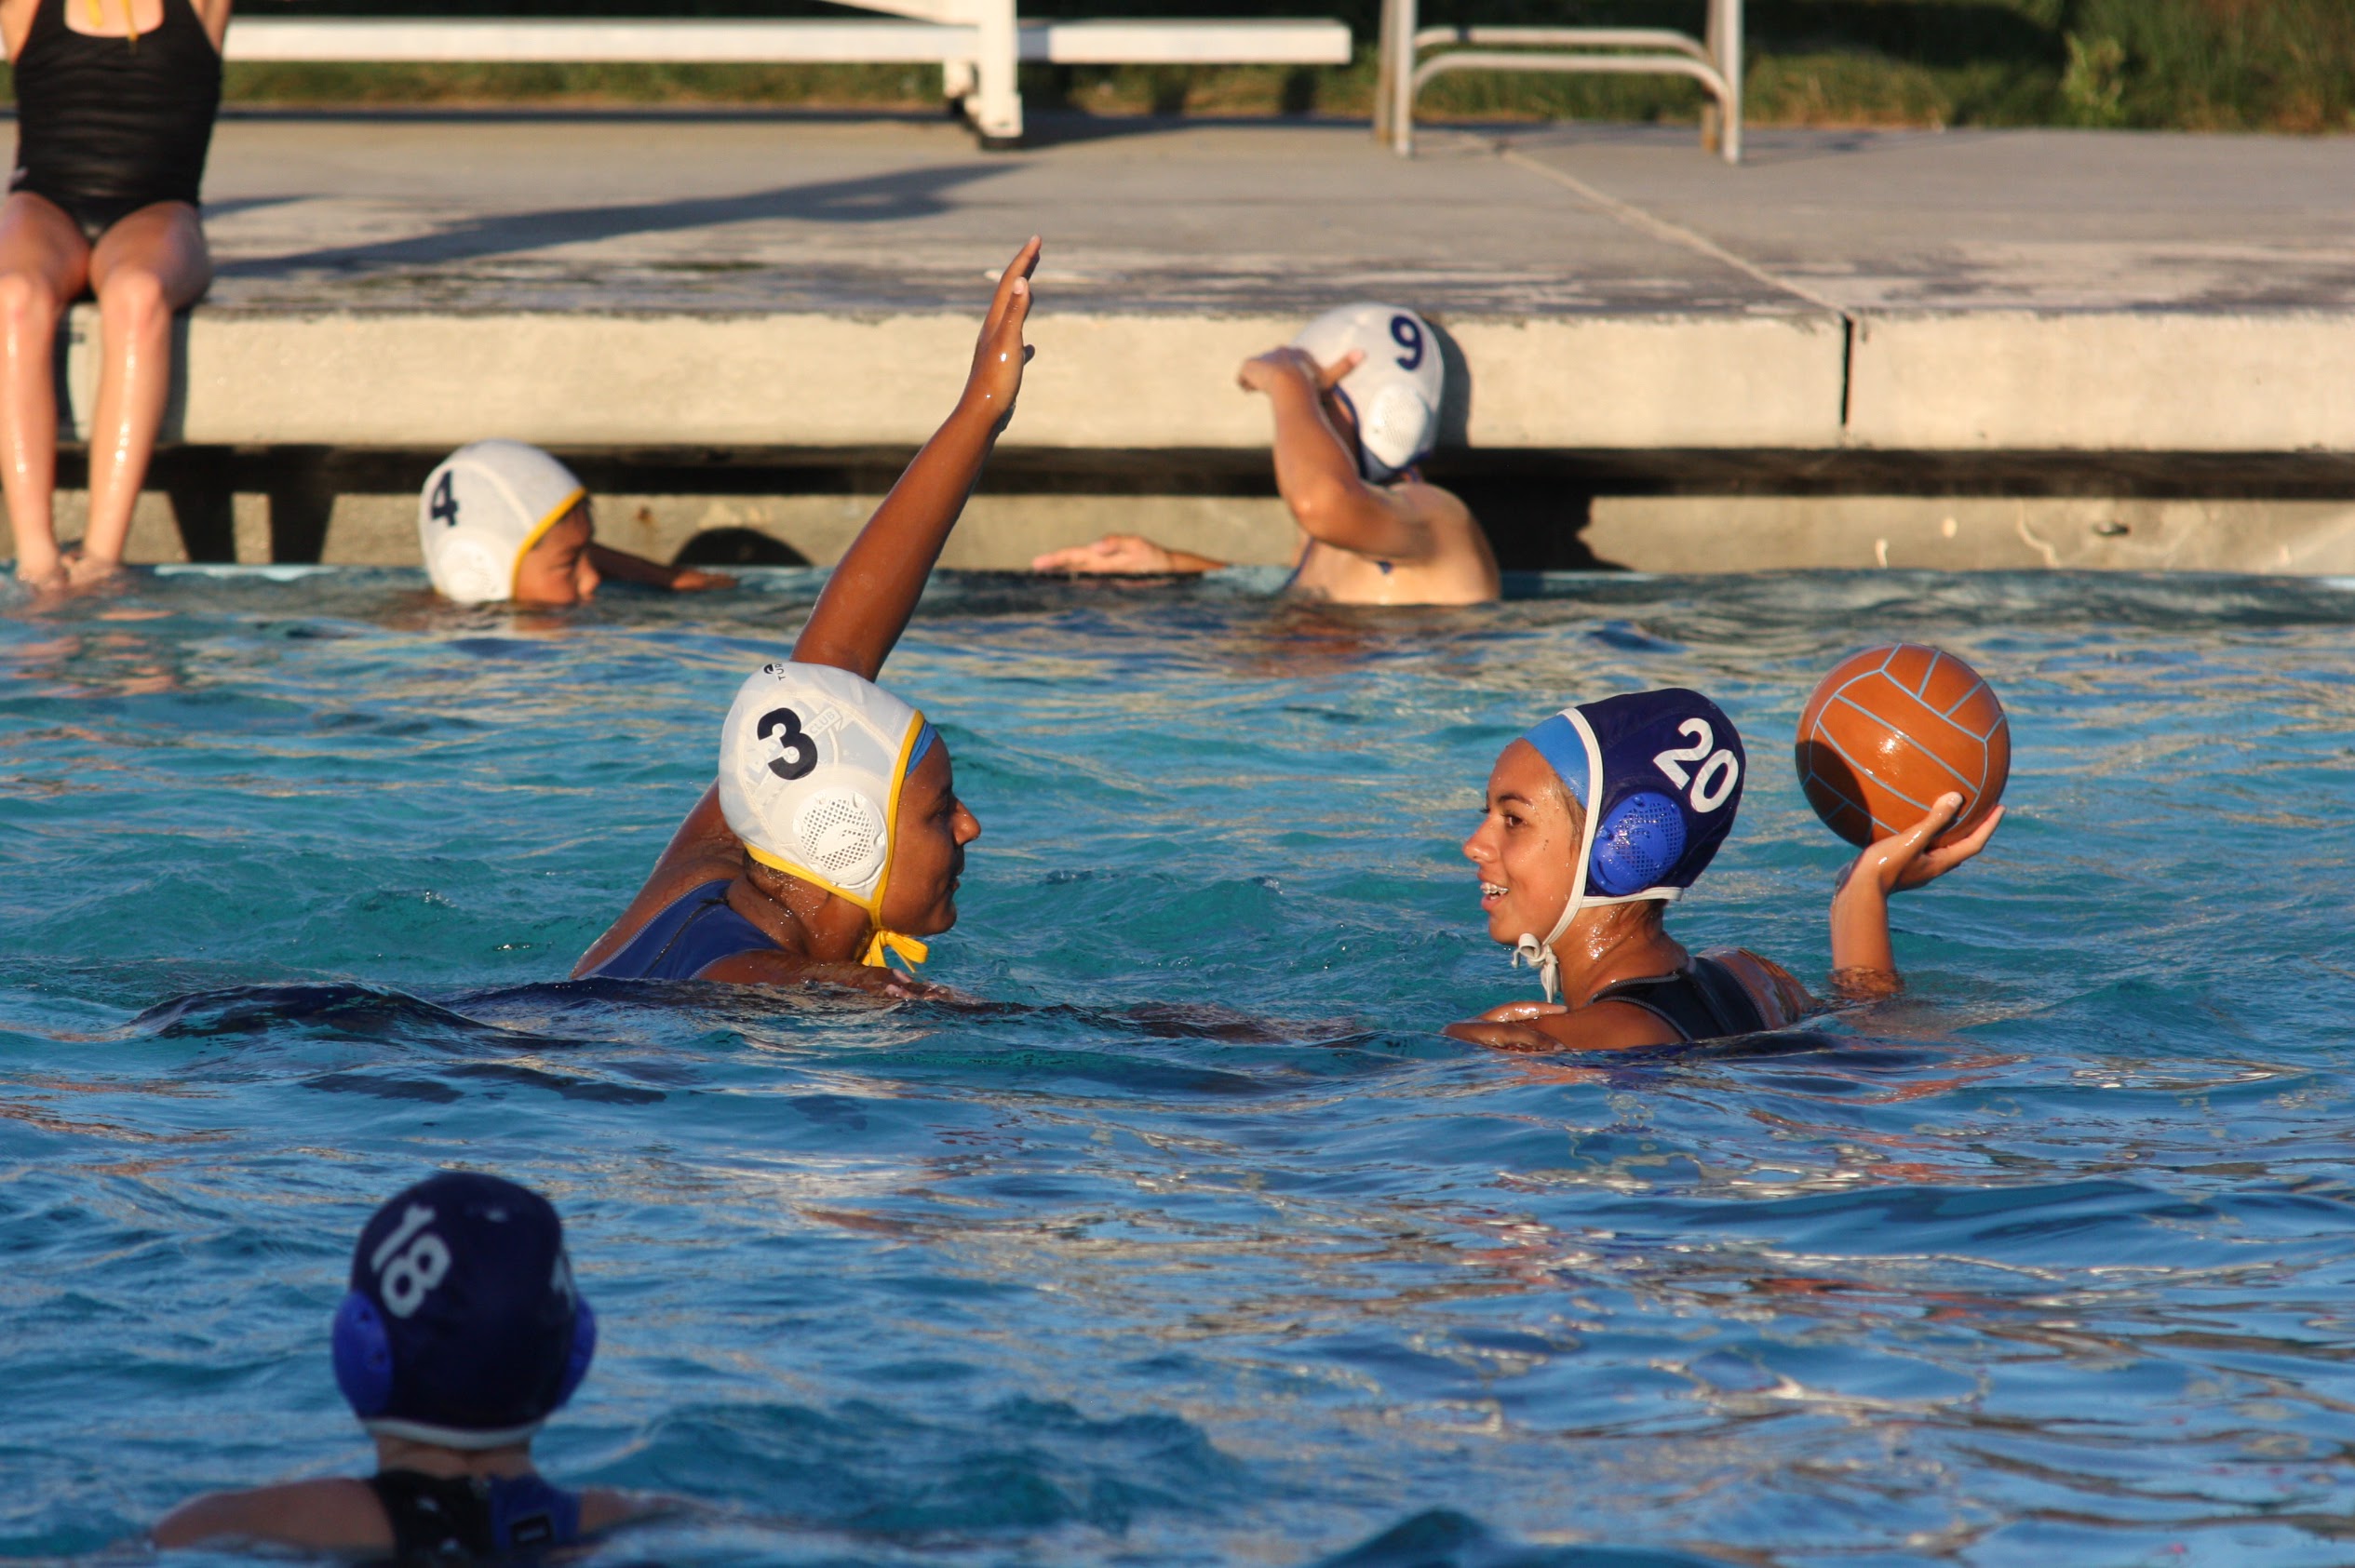 Davis Water Polo Club – Building in Youth Through Polo Since 1977